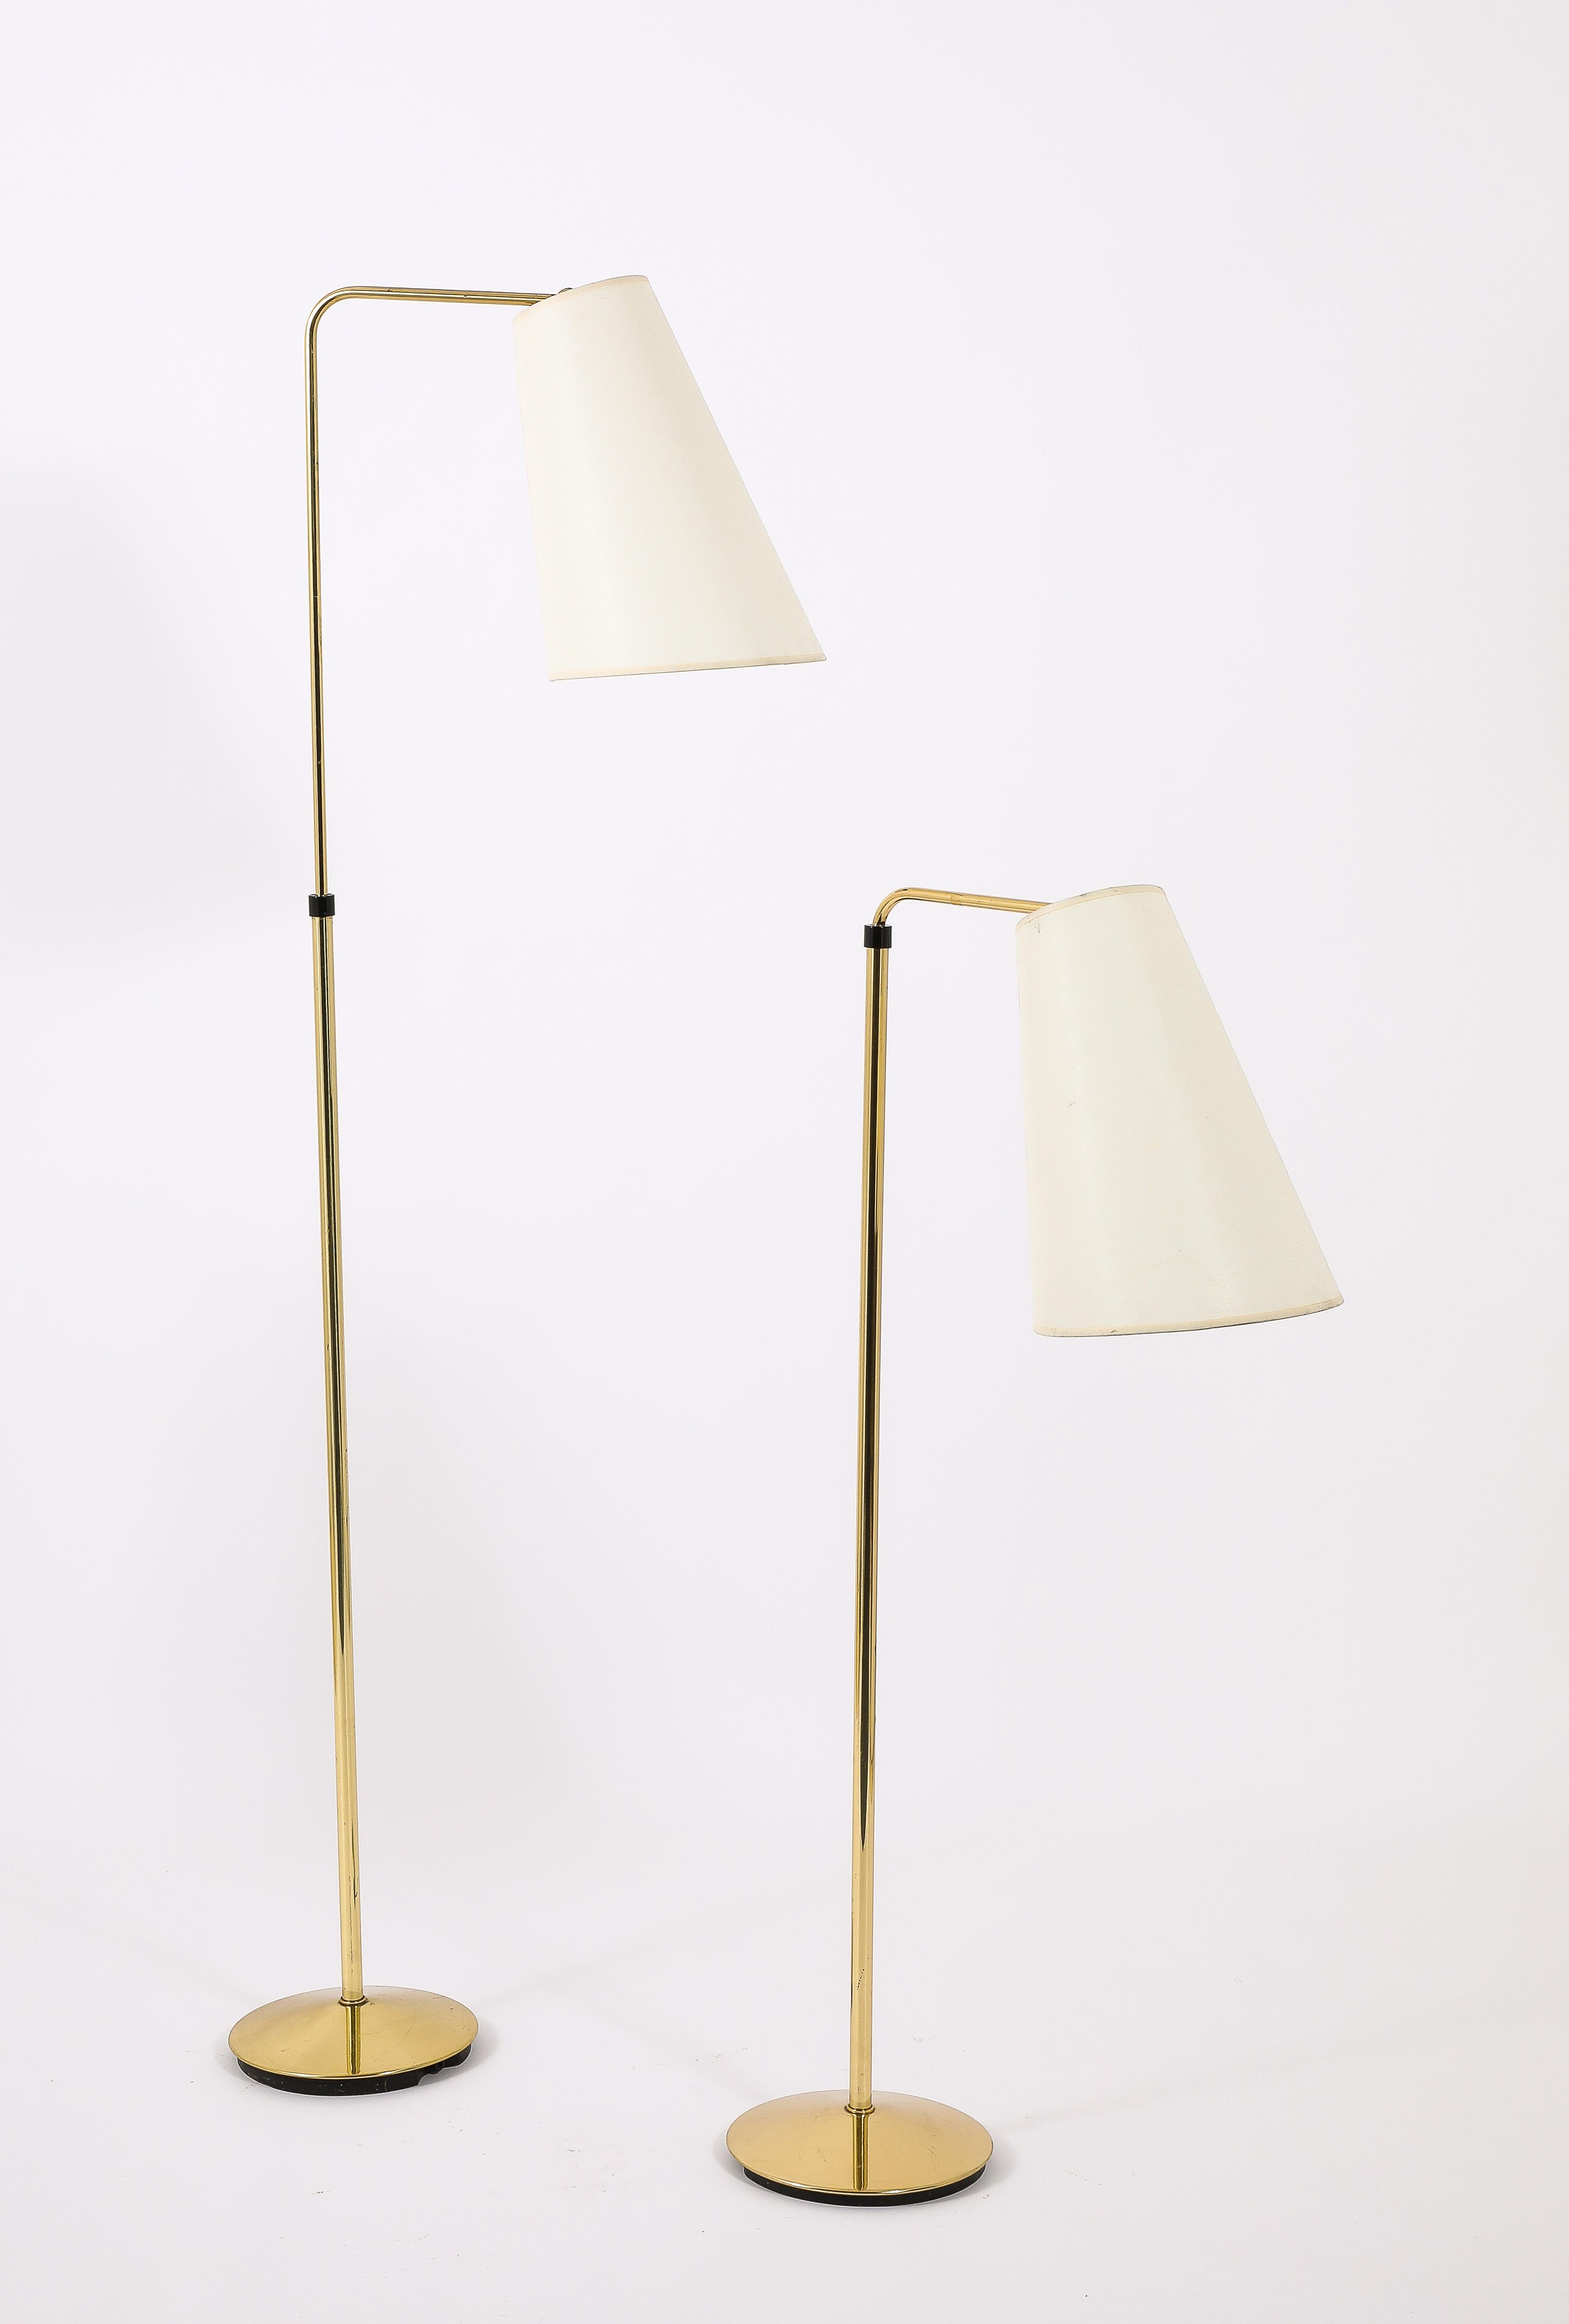 Metalarte Brass Reading Floor Lamps, Spain 1960's In Good Condition For Sale In New York, NY